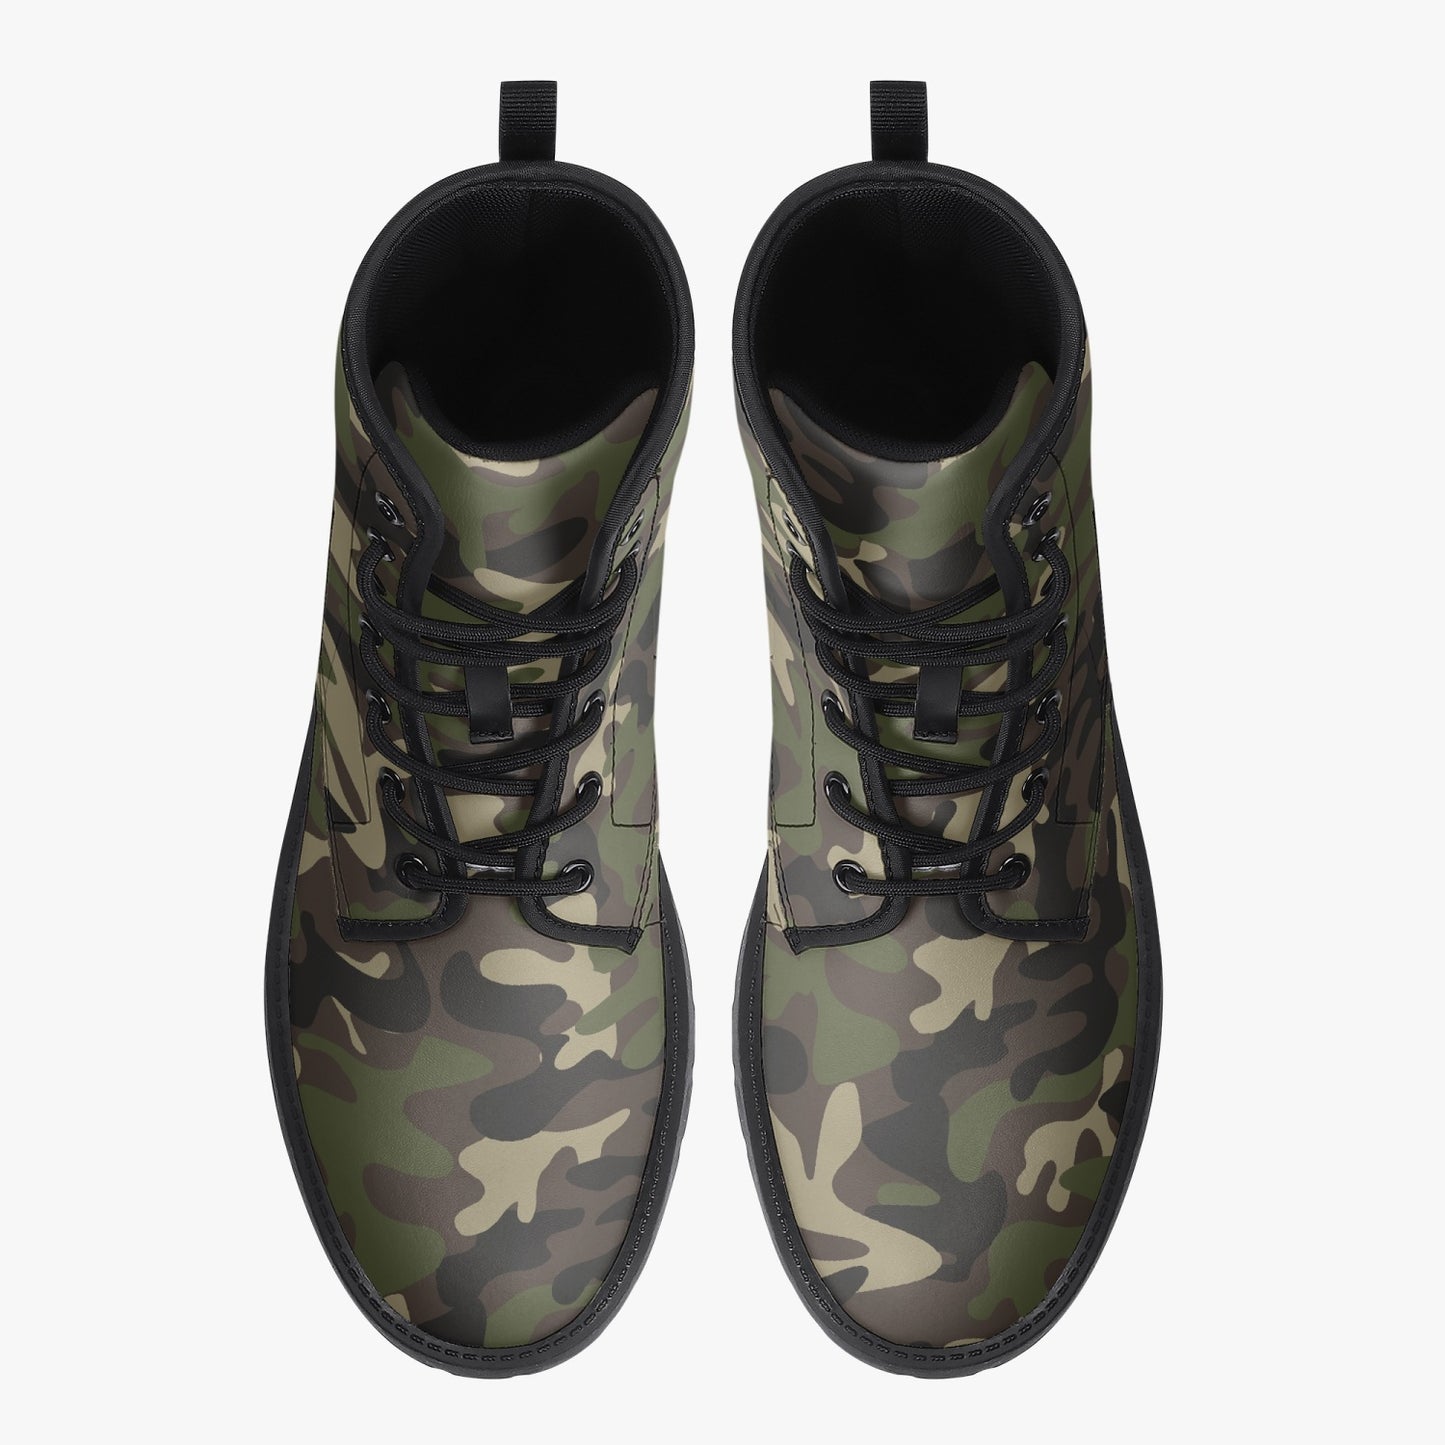 Camouflage Women Vegan Leather Combat Boots, Green Army Camo Lace Up Shoes Hiking Festival Black Ankle Work Winter Casual Custom